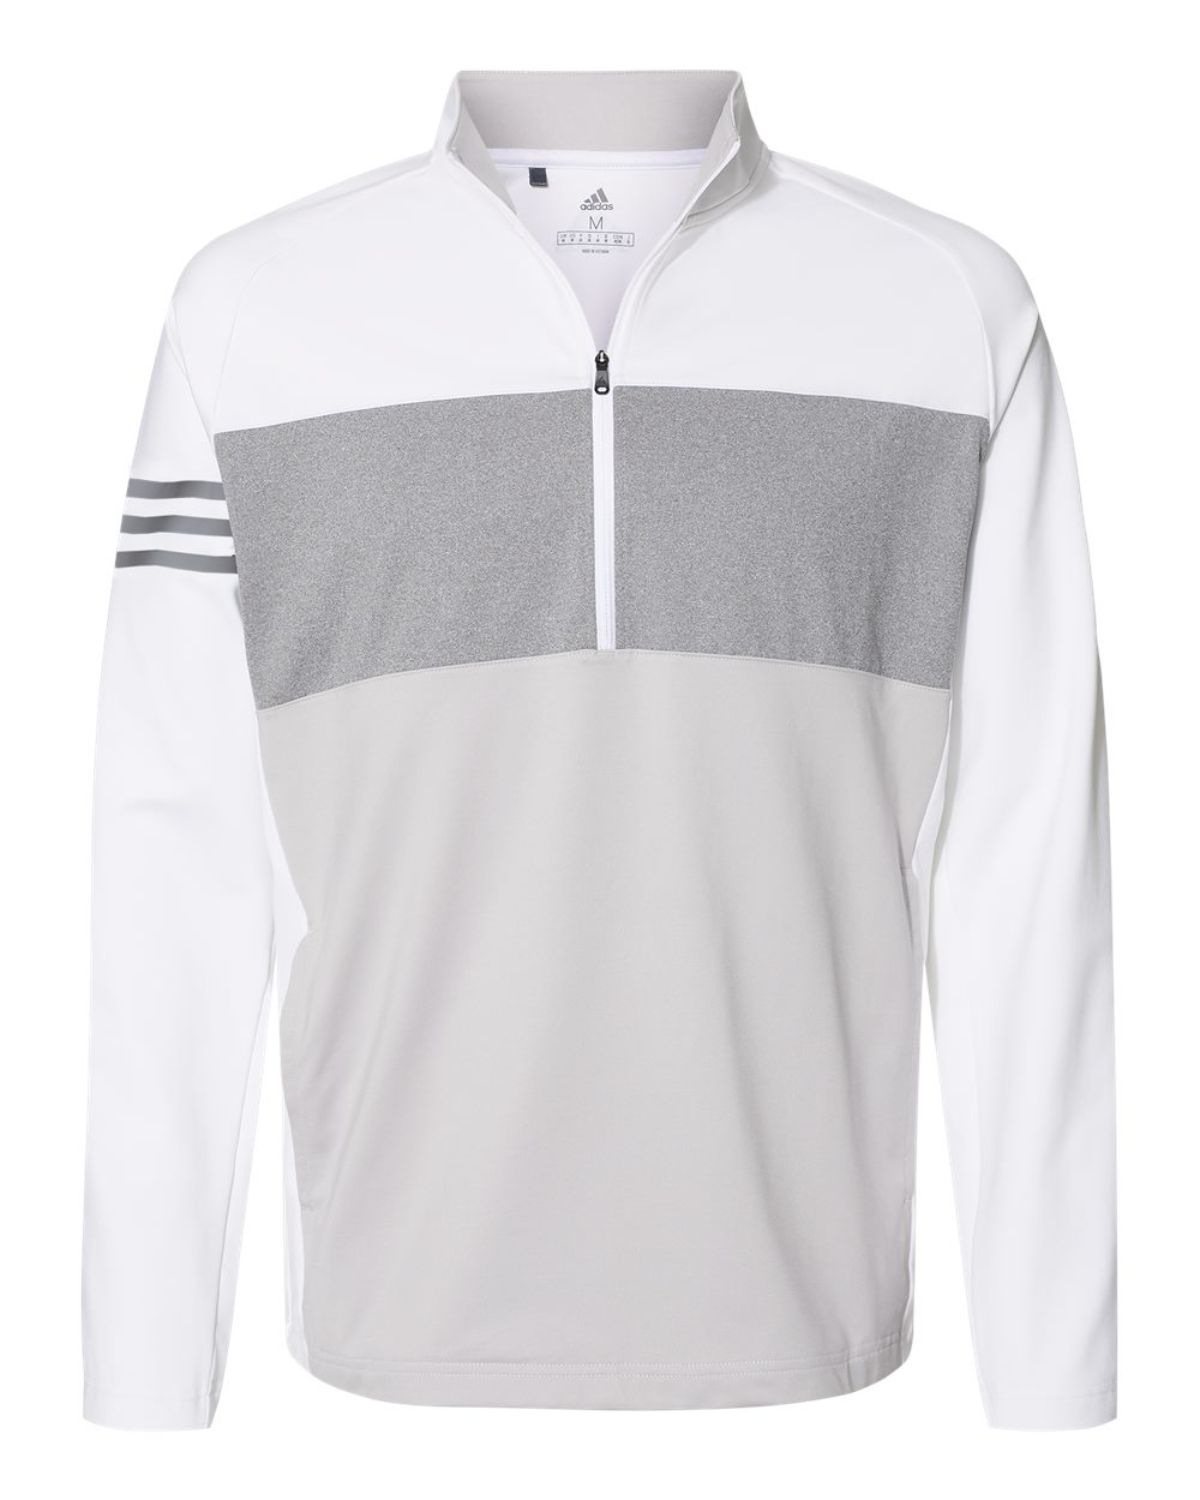 Adidas Golf A492 3-Stripes Competition Quarter-Zip Pullover